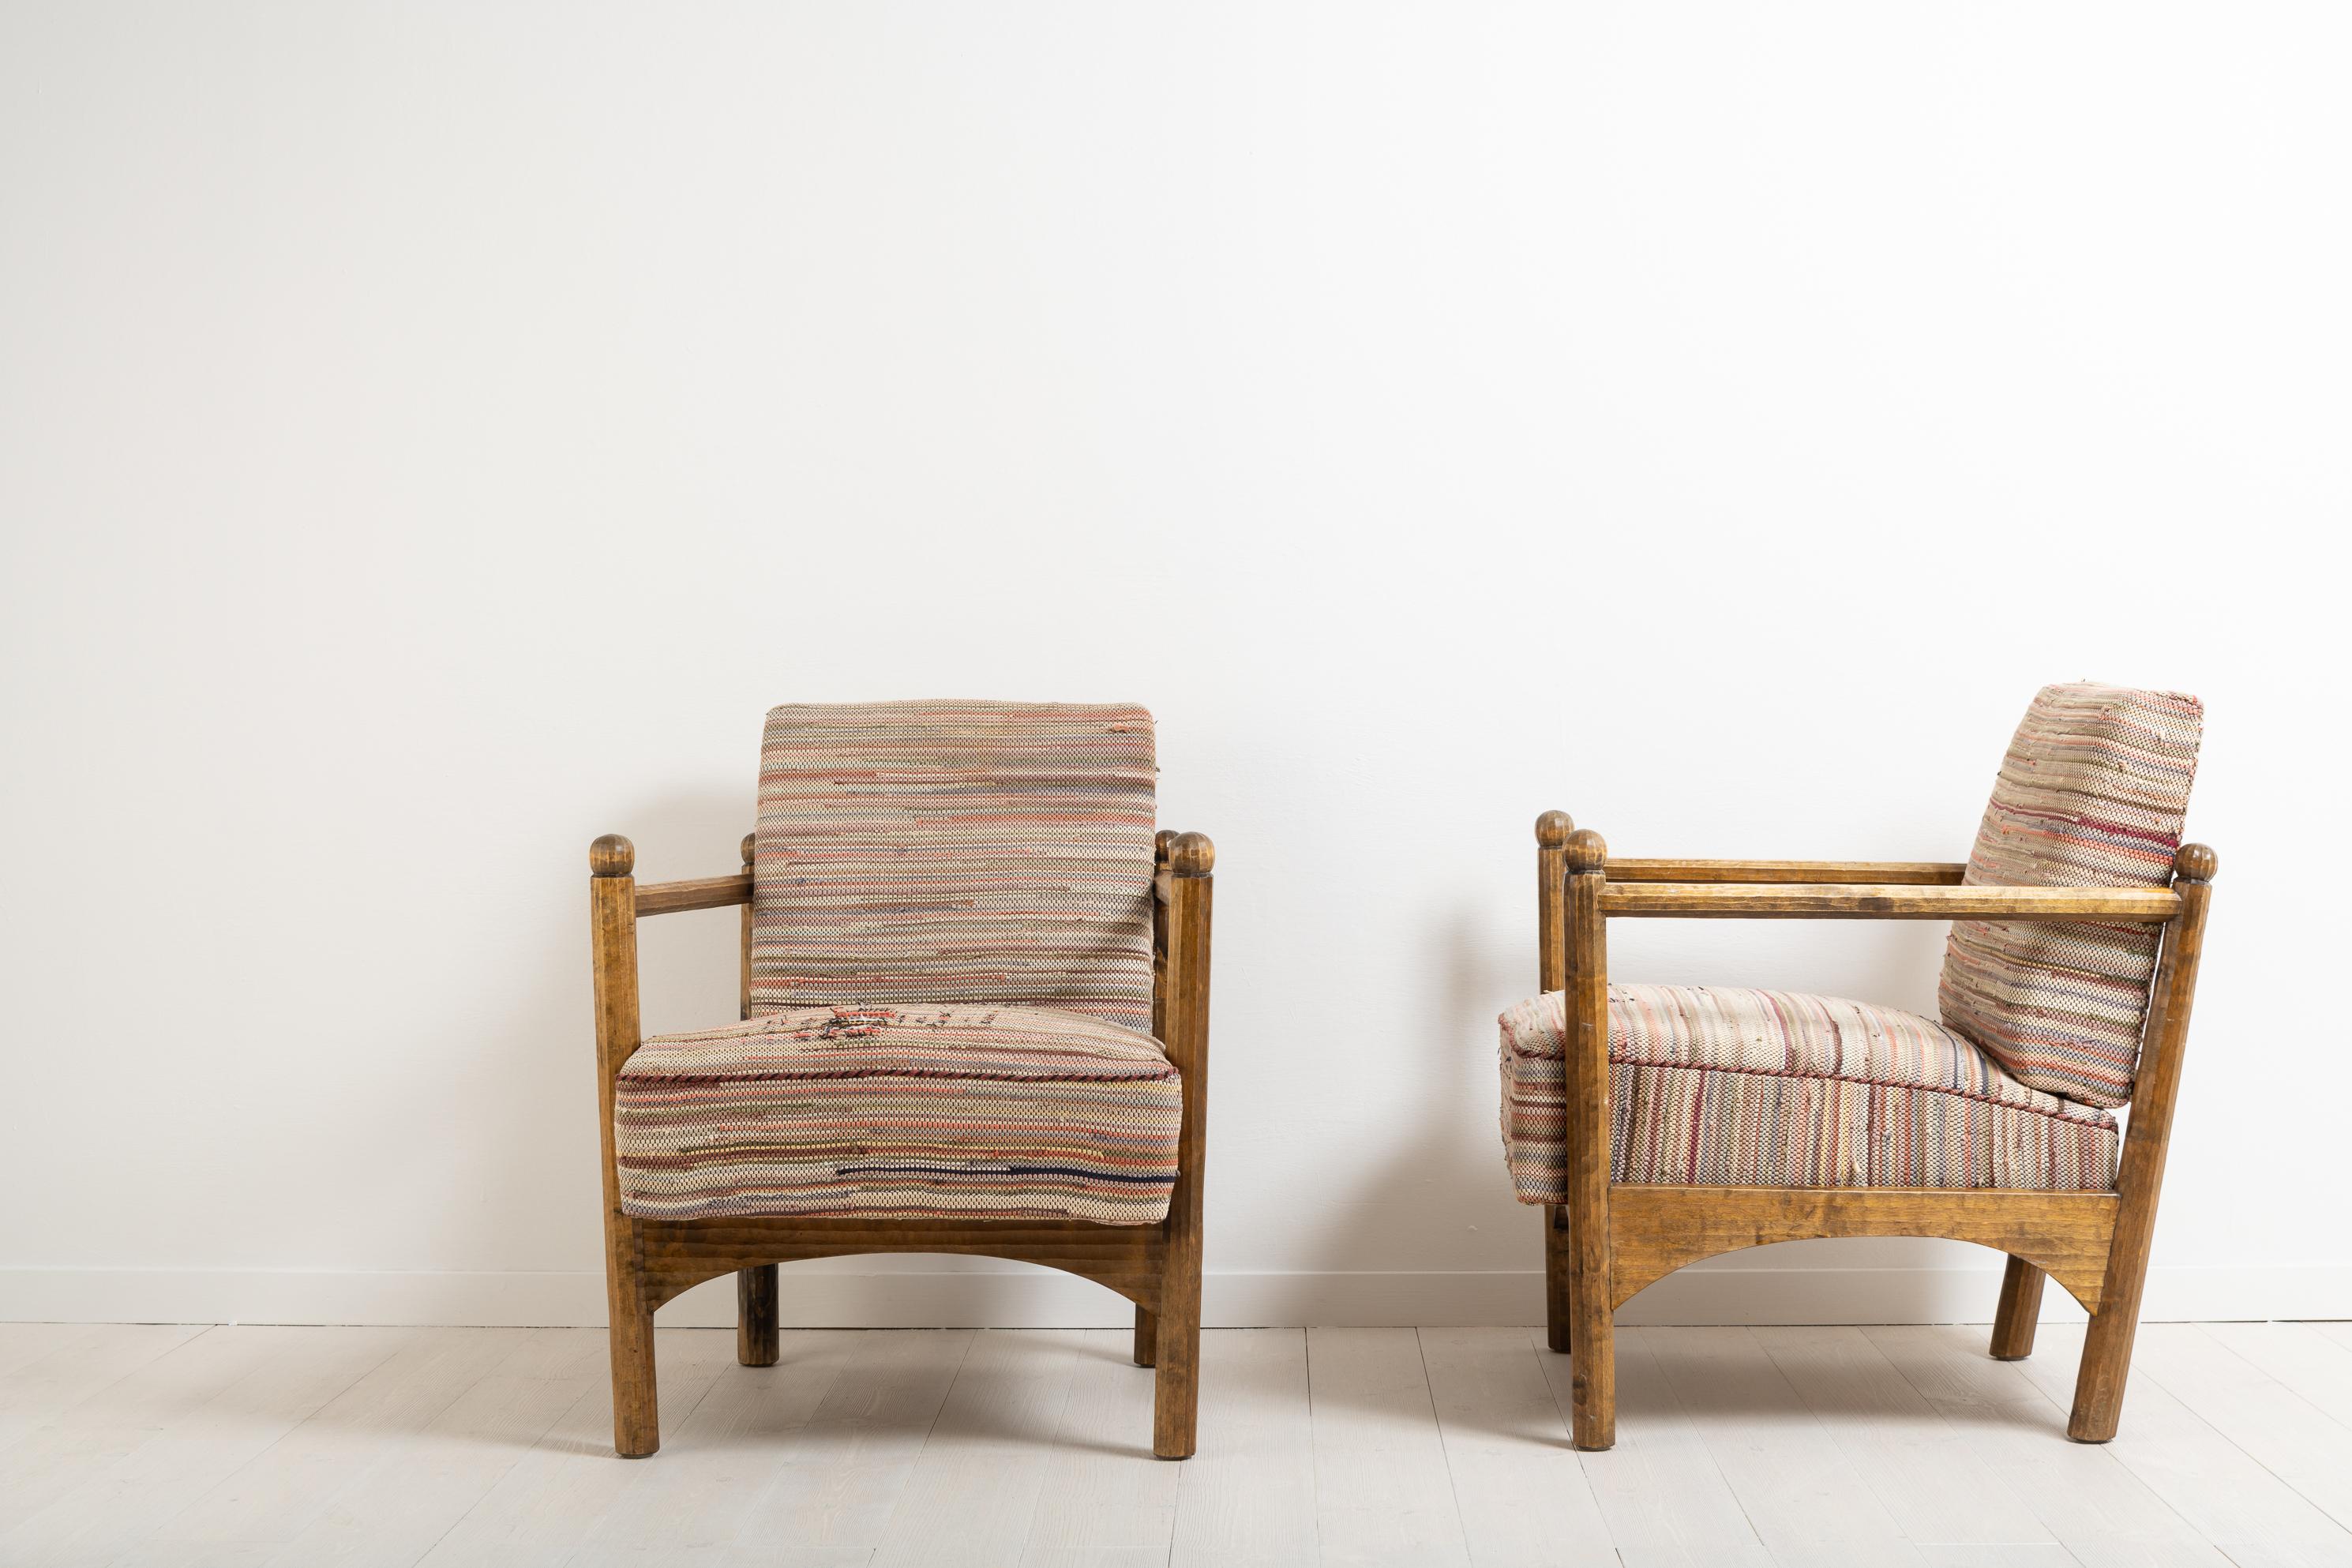 Art Deco Unusual Armchairs Swedish Grace from the Early 20th Century